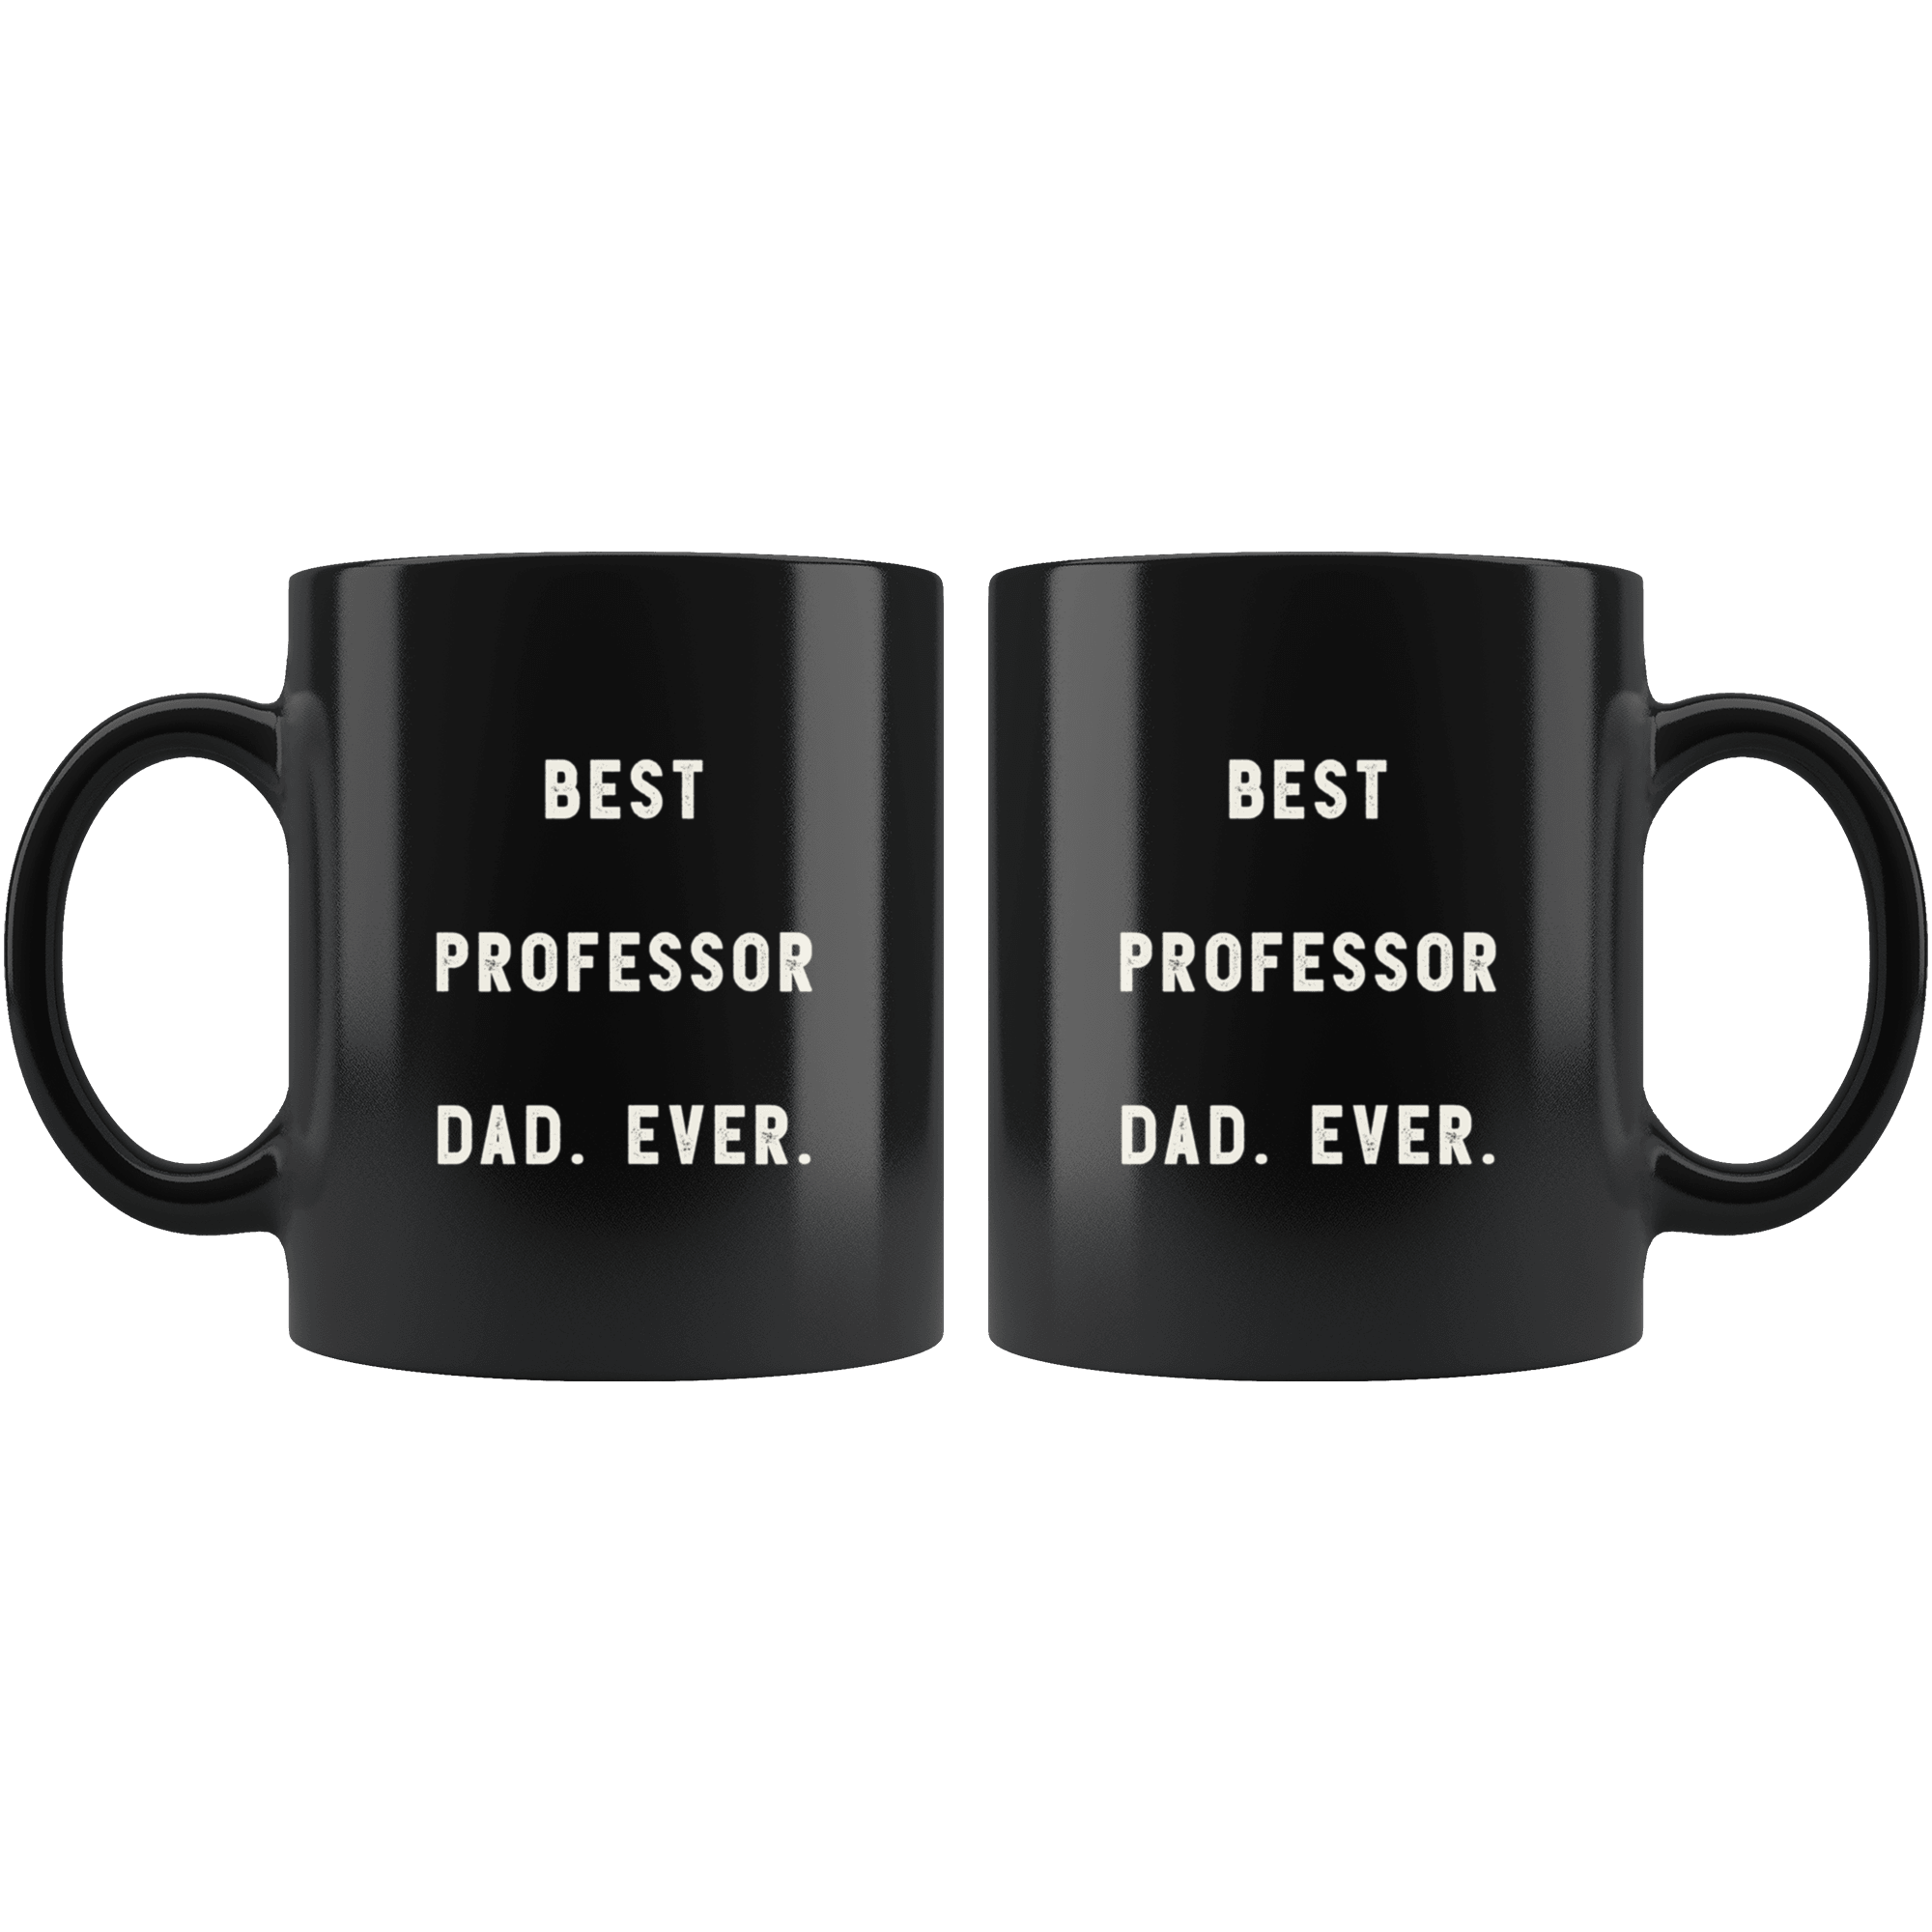 25 Best Gifts for Professors [2023] Reviews. Good Professor Gifts